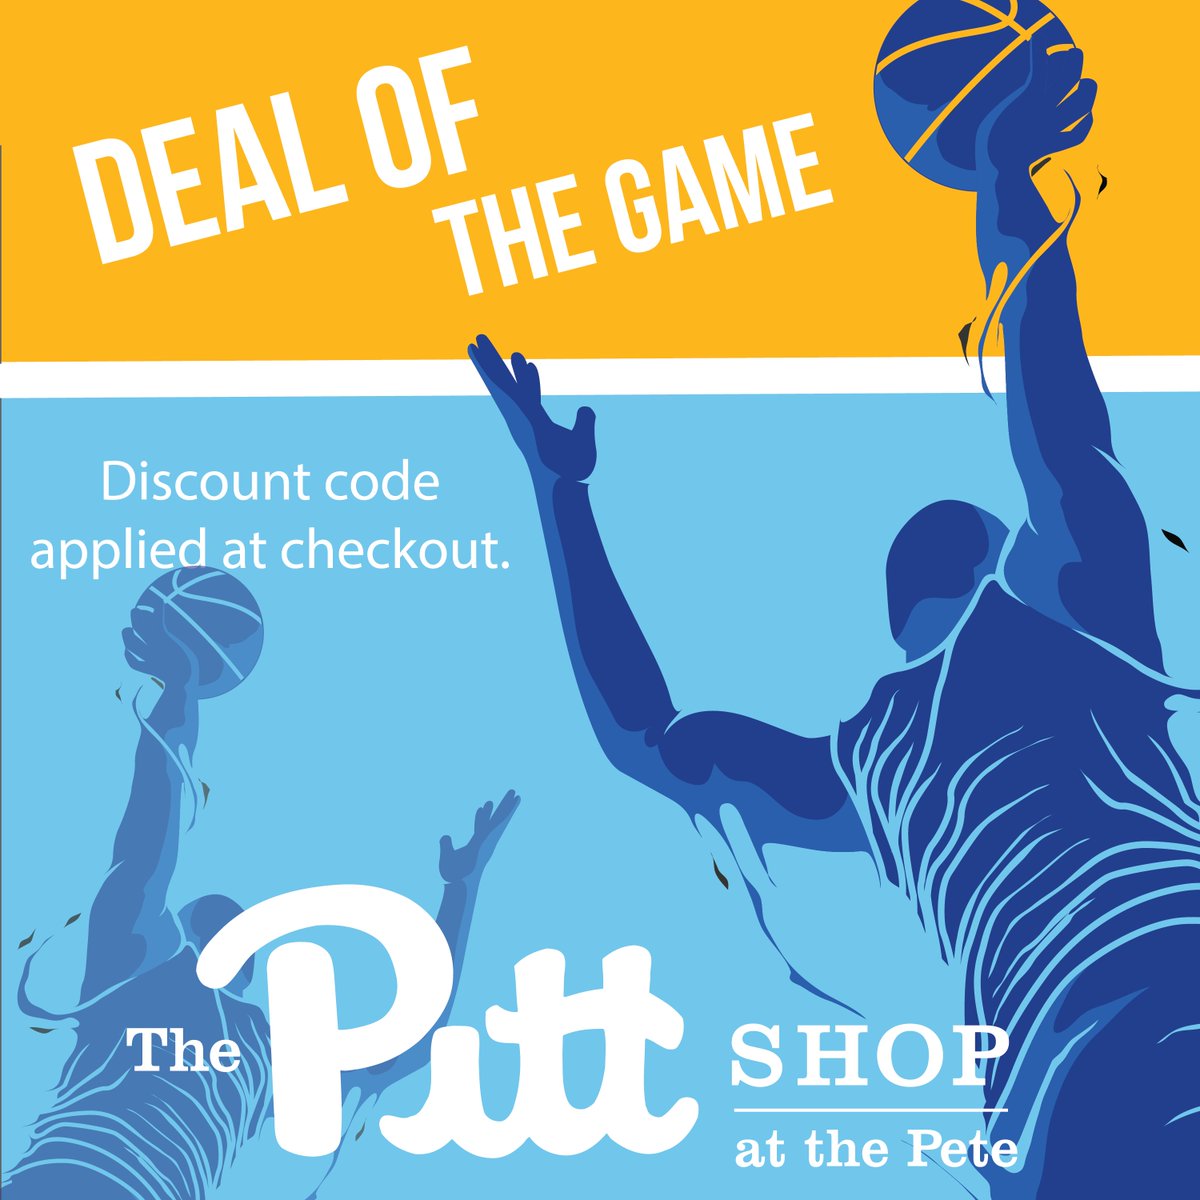 The Pitt Men's Basketball team will be taking on Syracuse on January 25 at 8pm! The Pitt Shop at the Pete is offering 50% of Zoo shirts only at the game. Stop by! 

#Pitt #H2P #ThePete https://t.co/5x7oKLVVR5